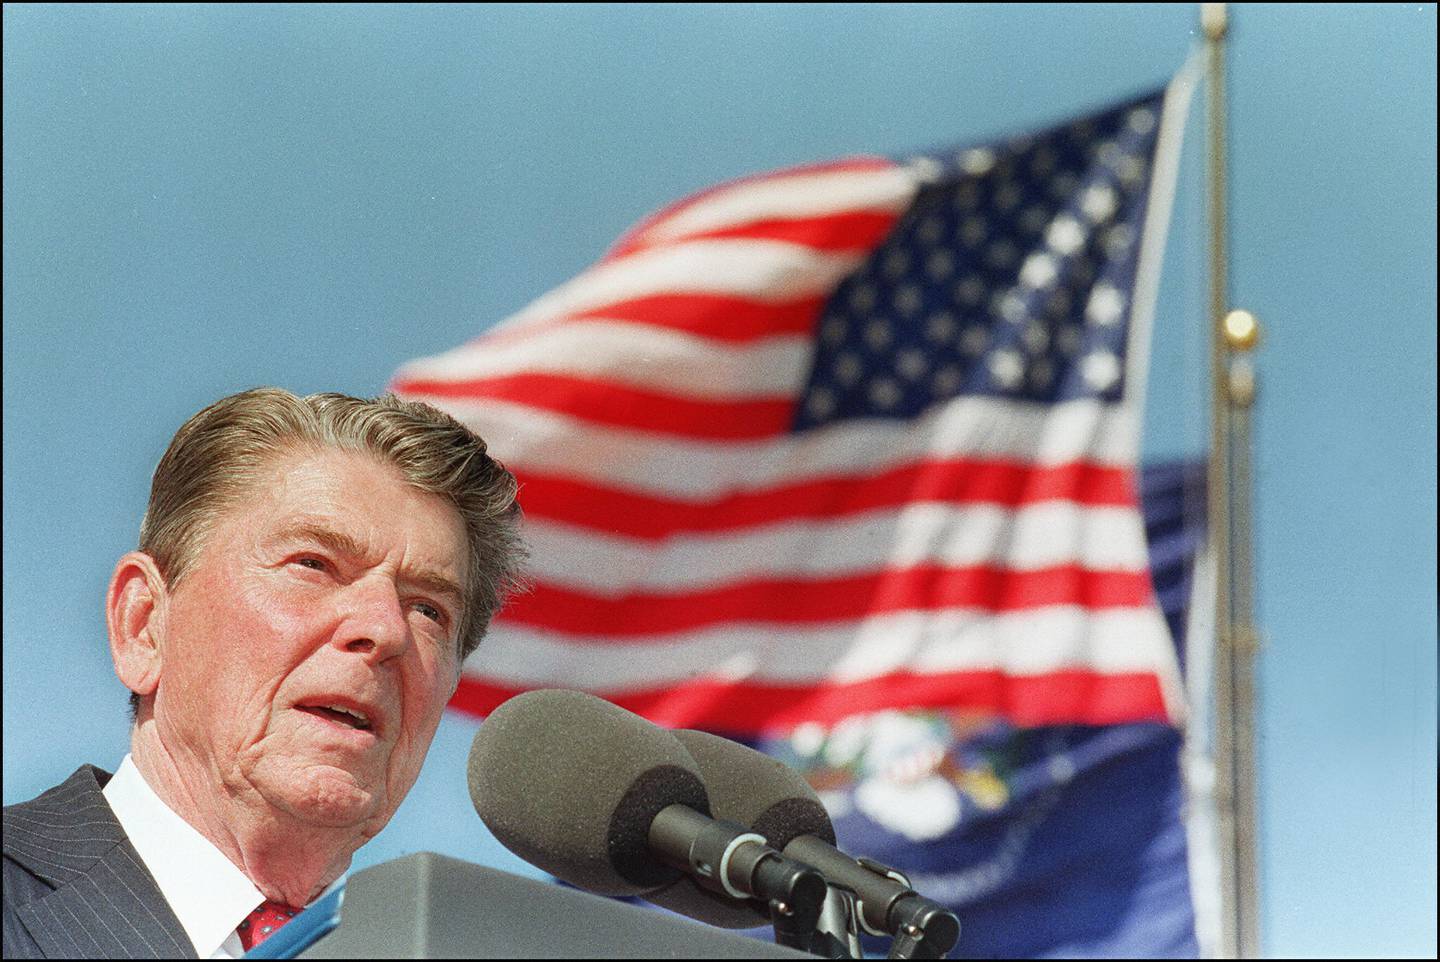 (FILES) File photo dated 04 November, 1991 shows US President Ronald Reagan giving a speech at the dedication of the library bearing his name in Simi Valley, California. Reagan broke his right hip late 12 January, 2001 after a fall in his home. He is listed in stable condition and will undergo surgery at St. John's Health Center in Santa Monica, CA, 13 January. Reagan will turn 90 on 06 February. He was US president from 1981 to 1989 and retreated from public life after it was revealed he was suffering from Alzheimer's disease. AFP PHOTO FILES-J. DAVID AKE